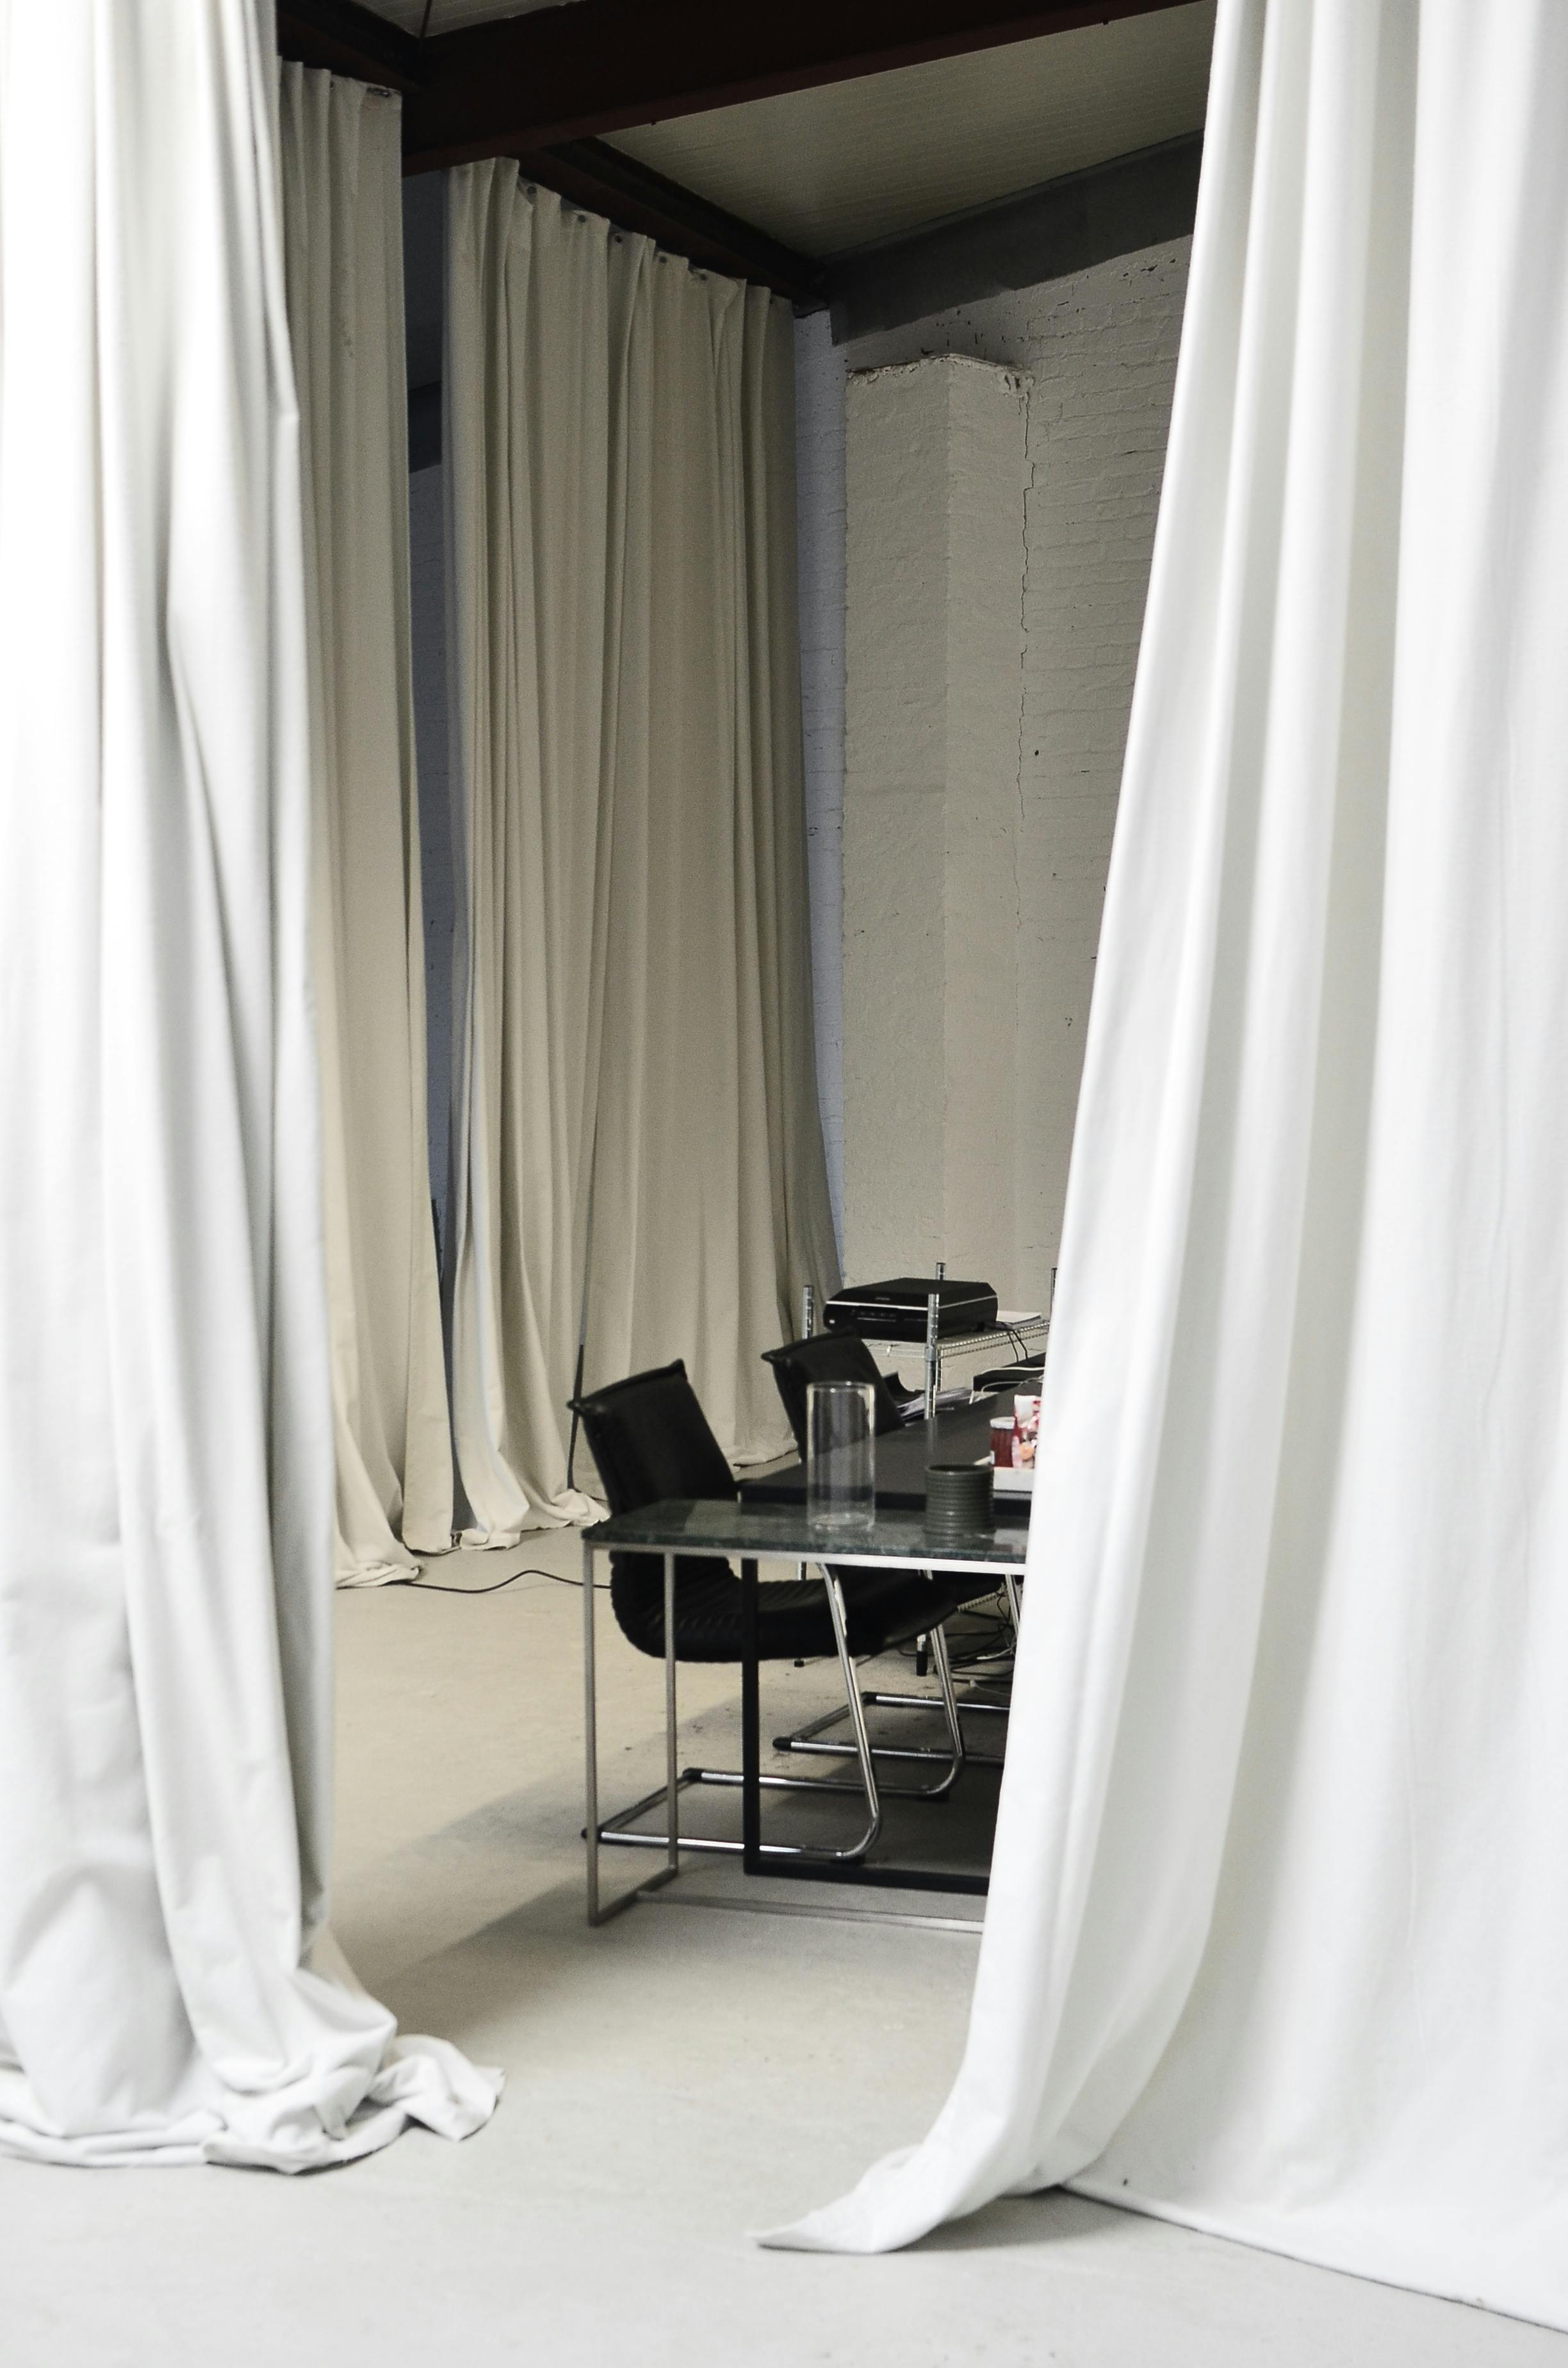 conference room with meeting table surrounded by curtains